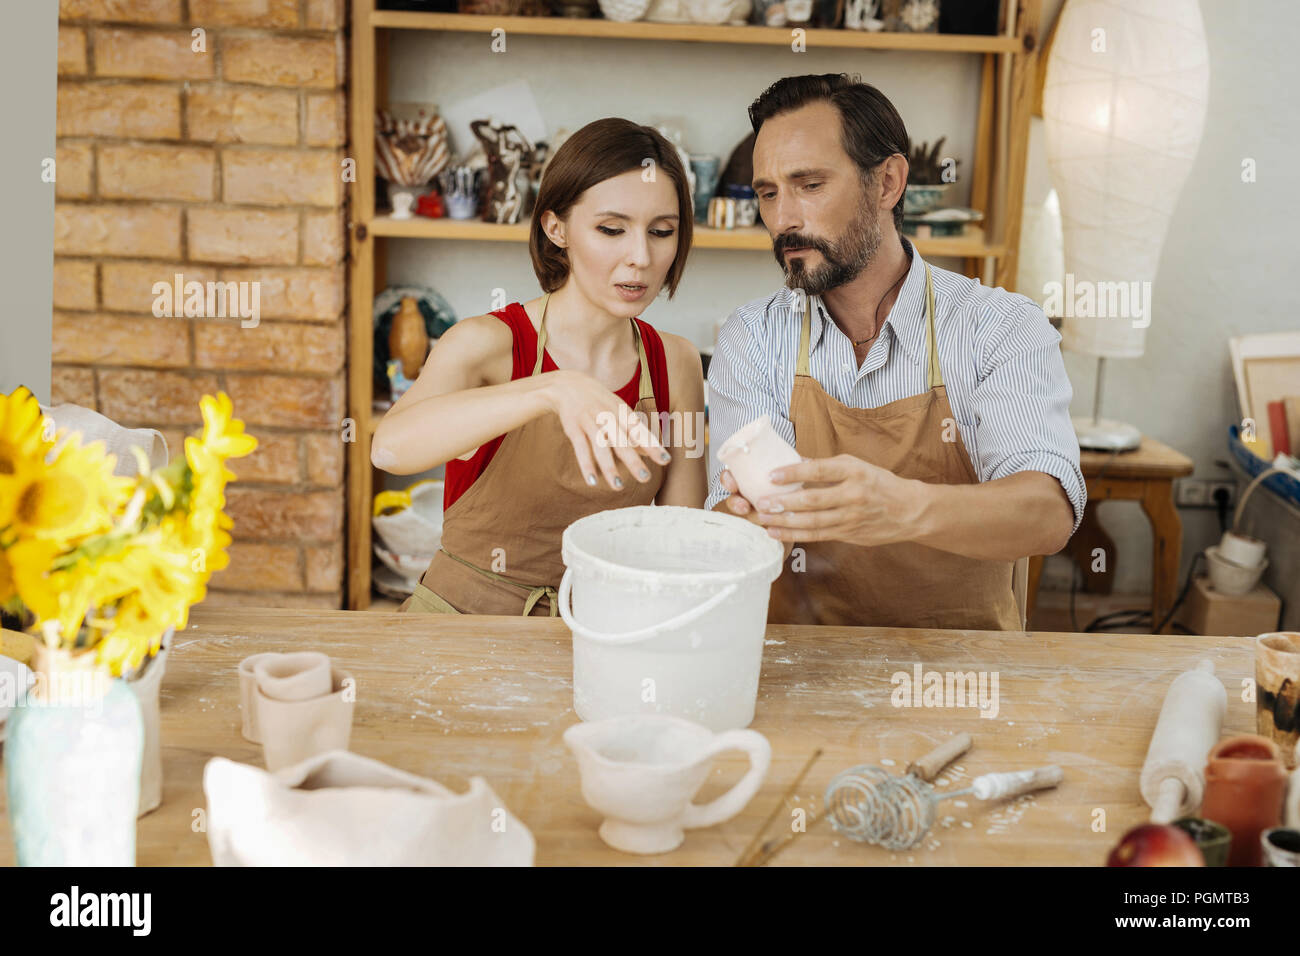 Dark-haired woman attending master class in ceramics Stock Photo